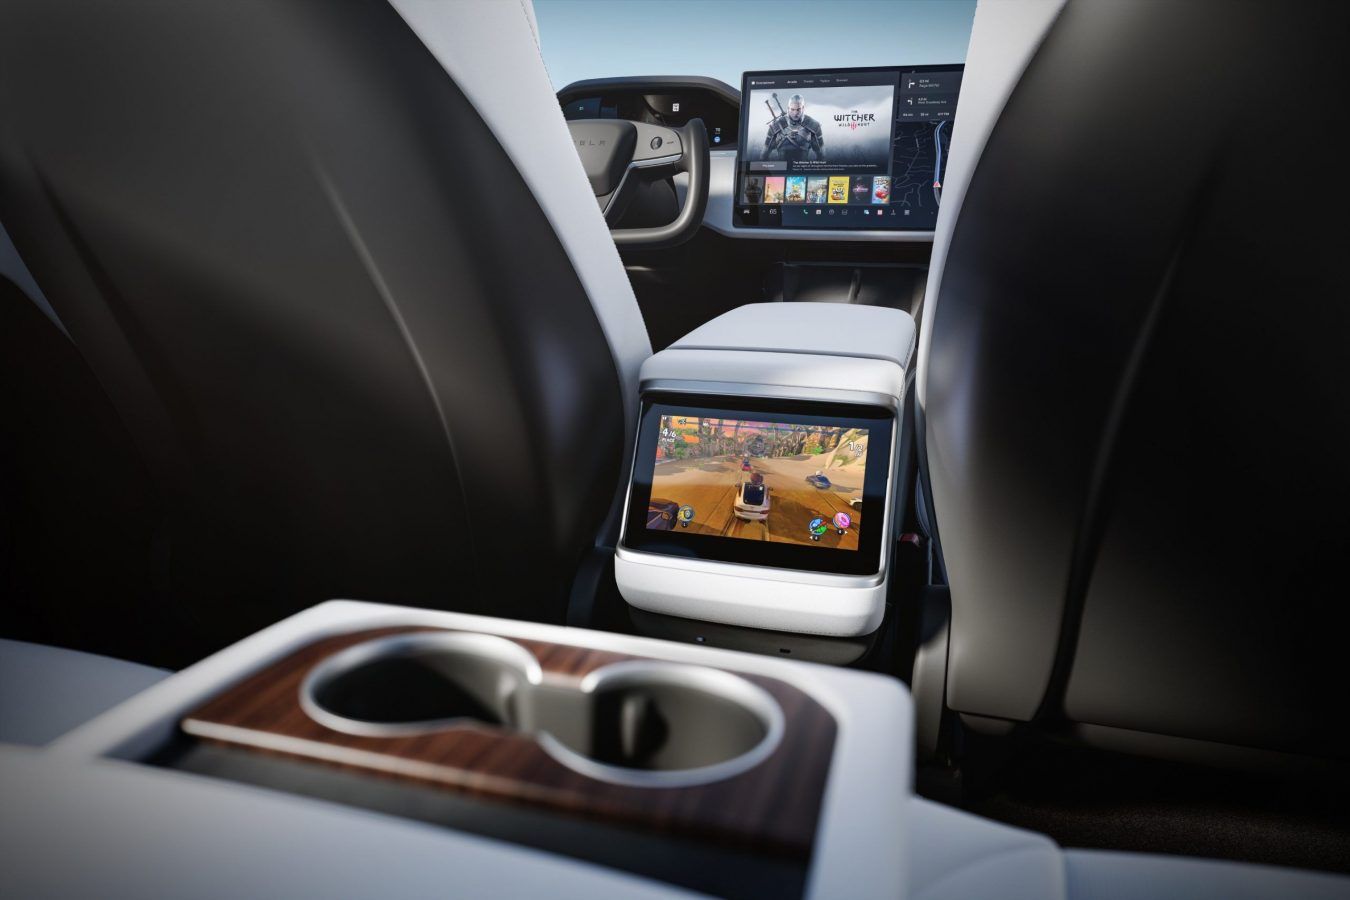 Tesla might integrate video games into its cars